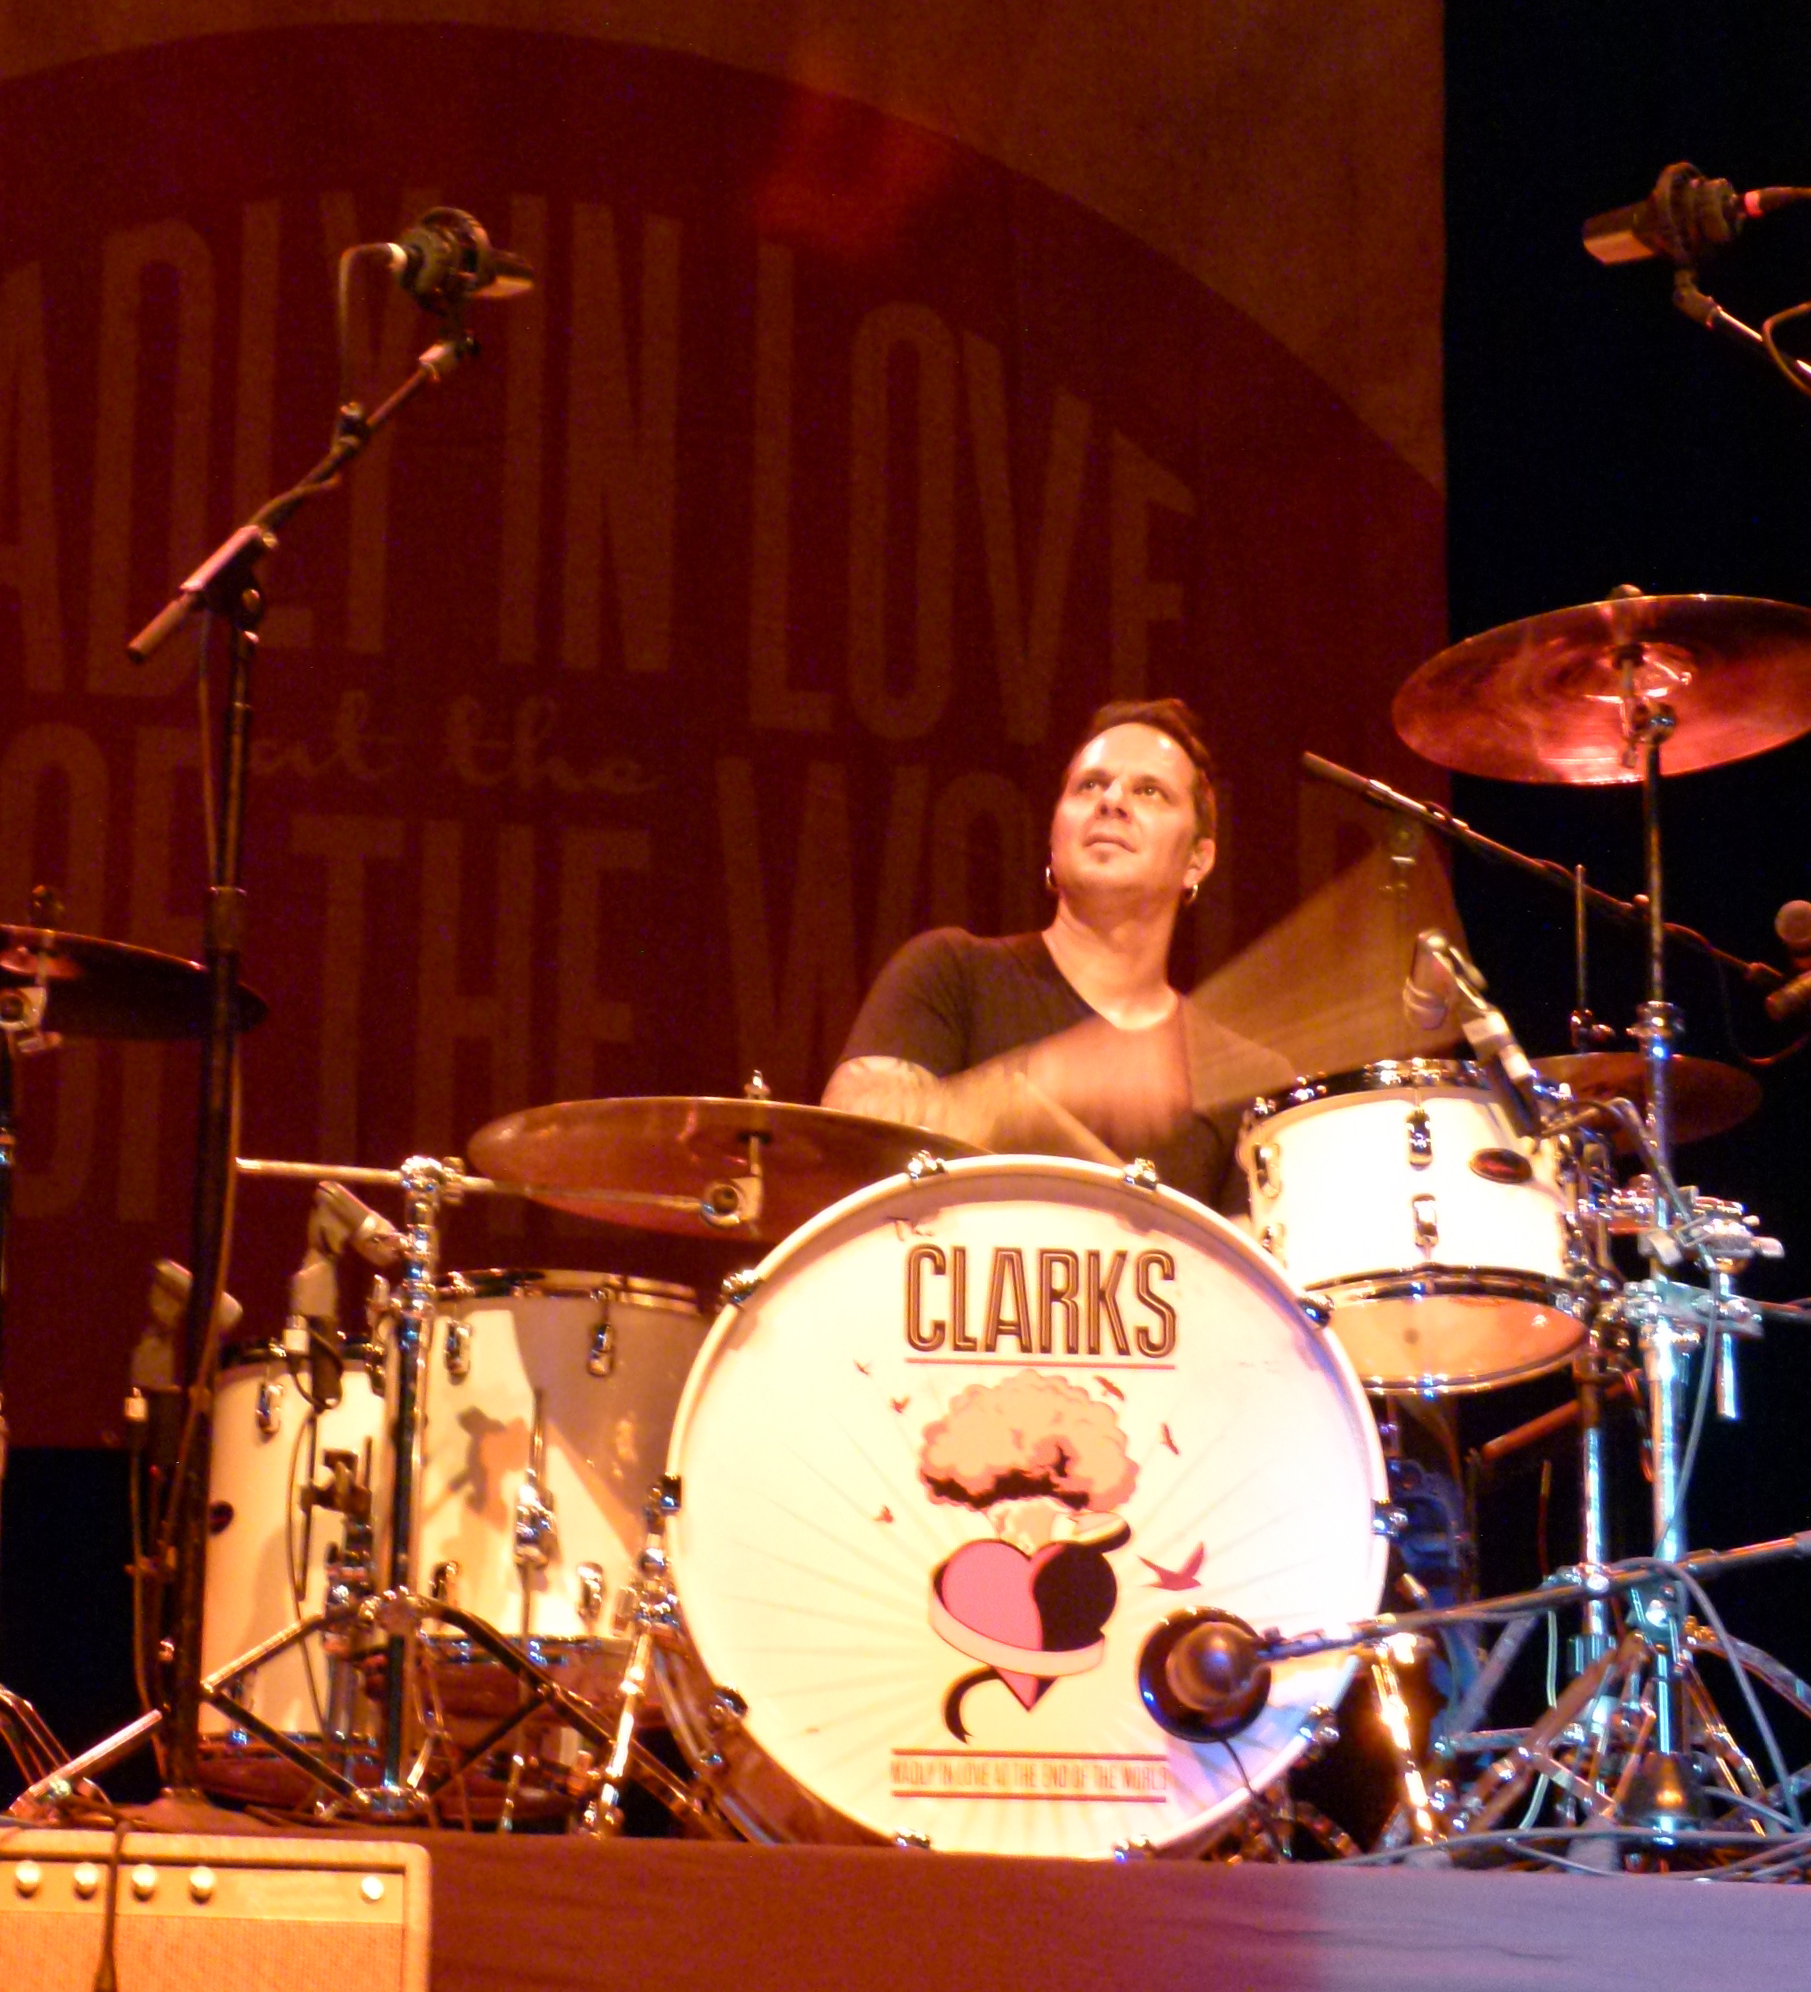 Dave Minarik often seems divinely inspired while playing his drums.